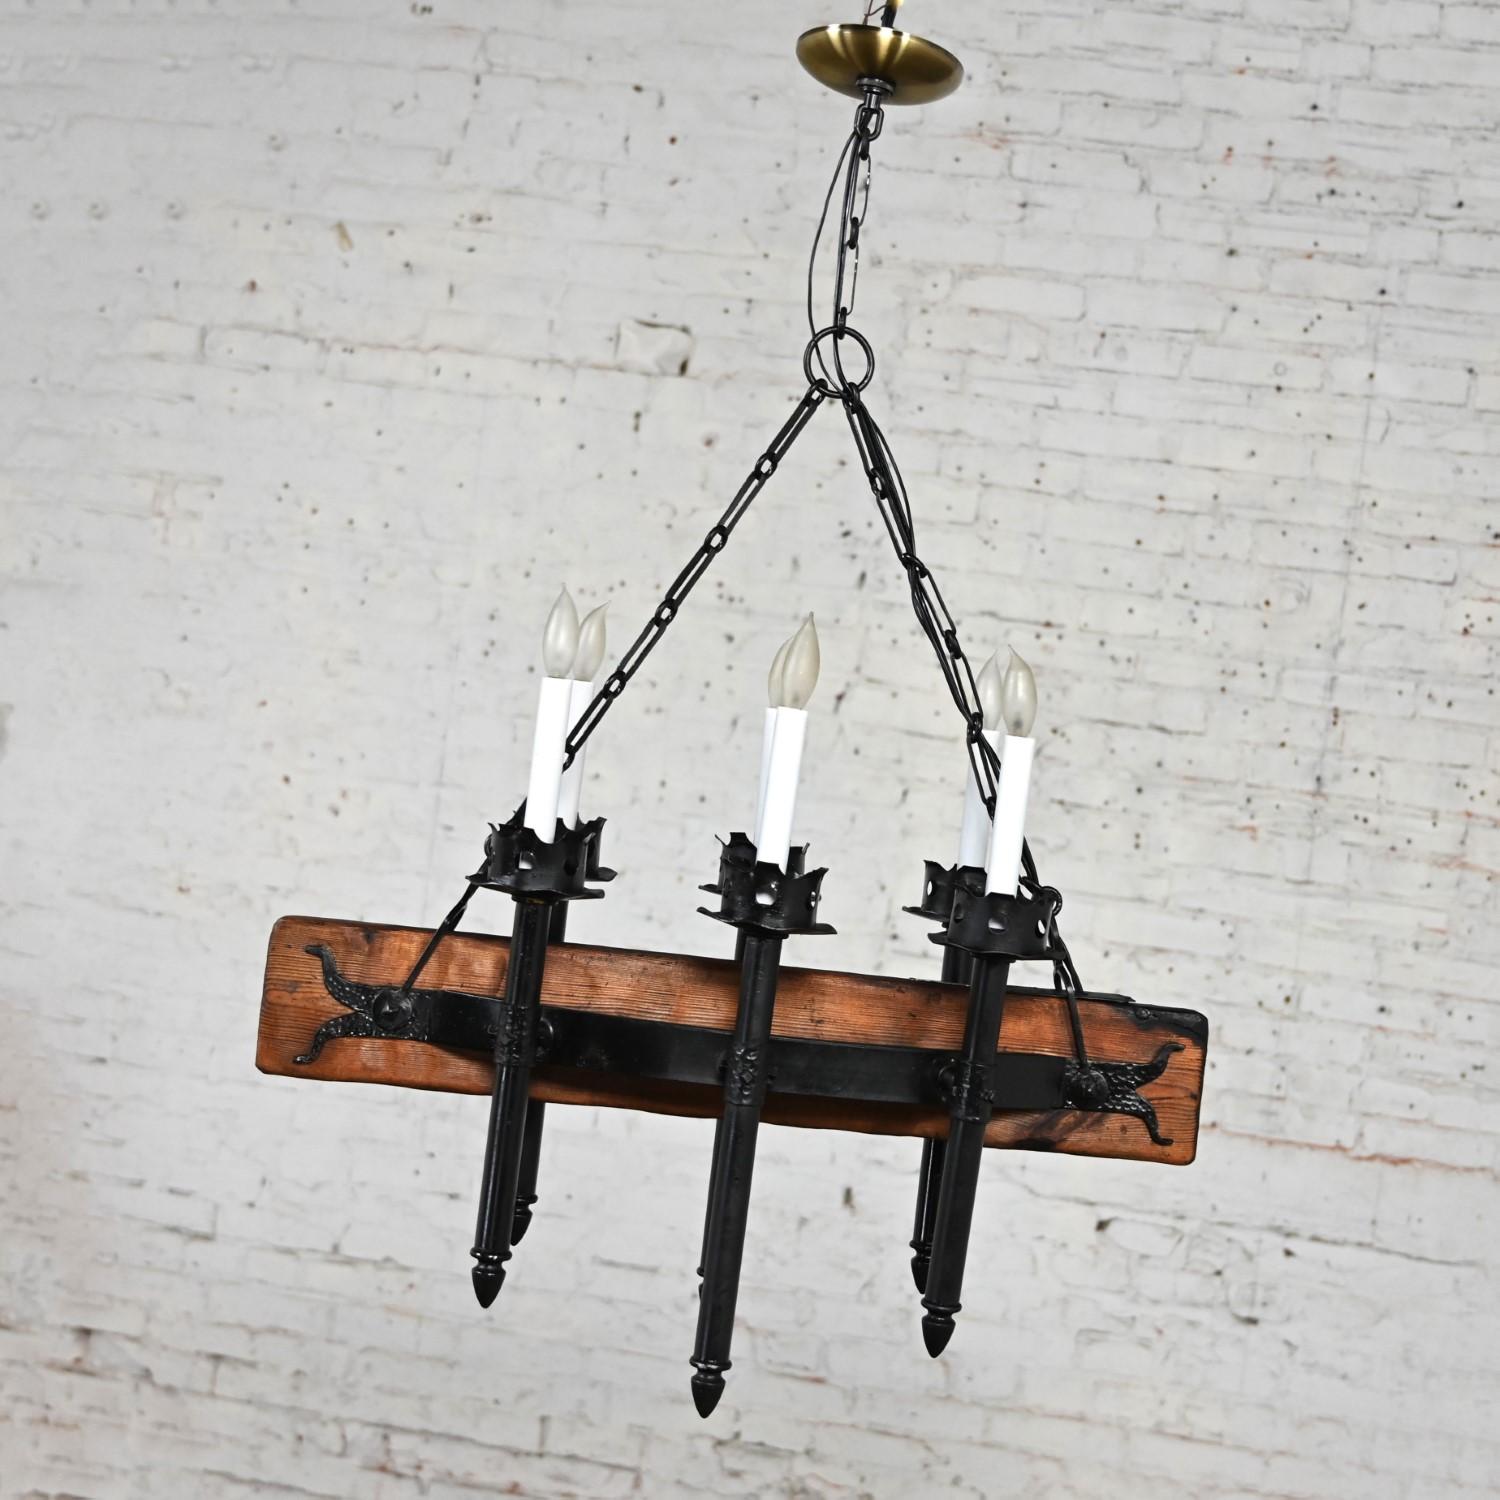 Mexican Medieval Gothic Spanish Revival Iron & Wood Beam Hanging Light Fixture Mexico For Sale